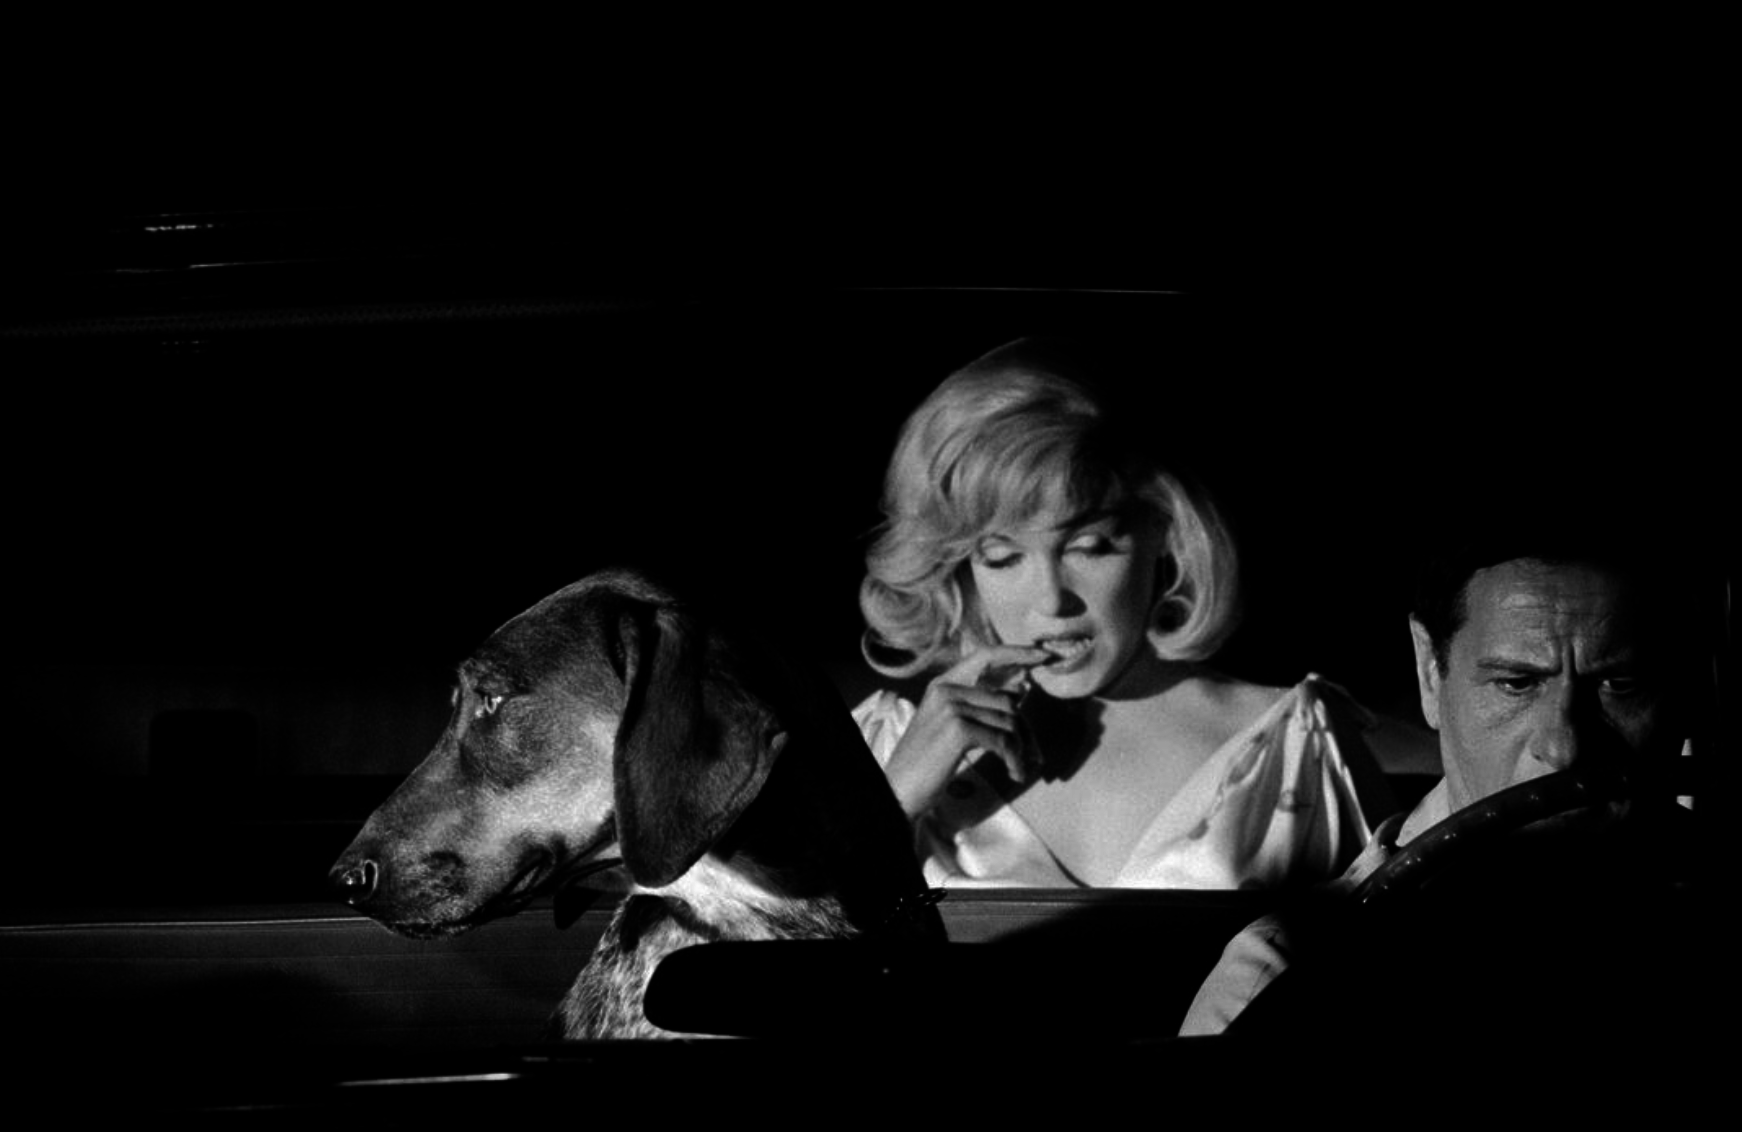 Candid view of a dog sitting in a car with actress Marilyn Monroe and actor Eli Wallach